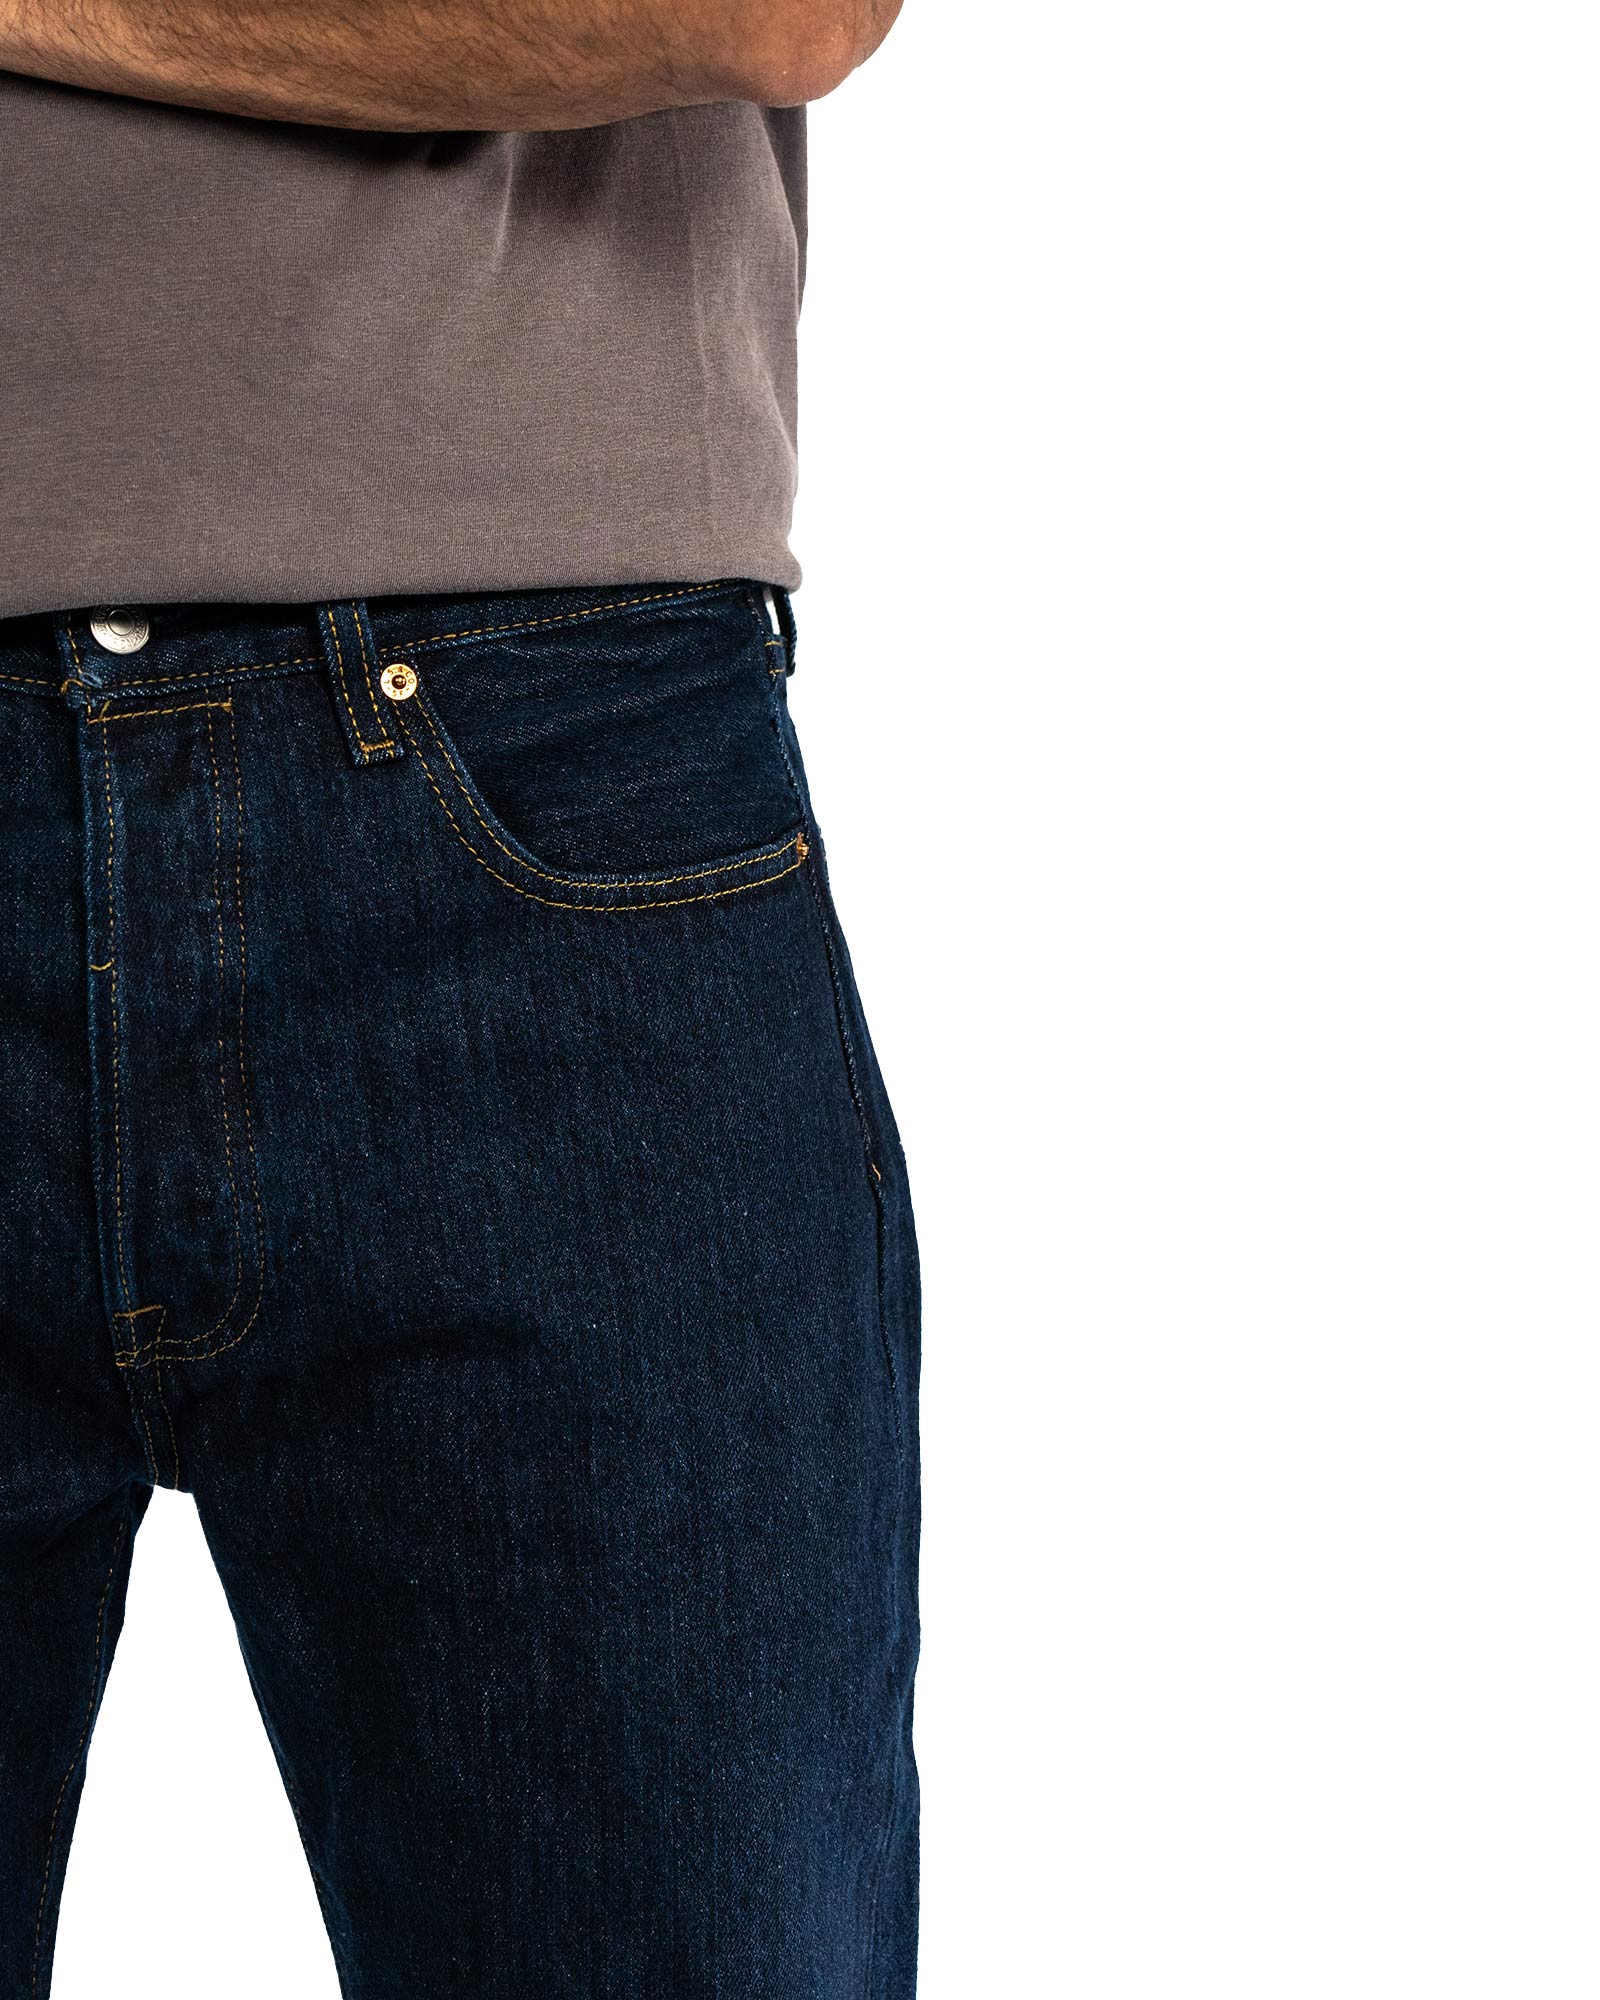 A front view of the pocket on the Levi's 501 jeans